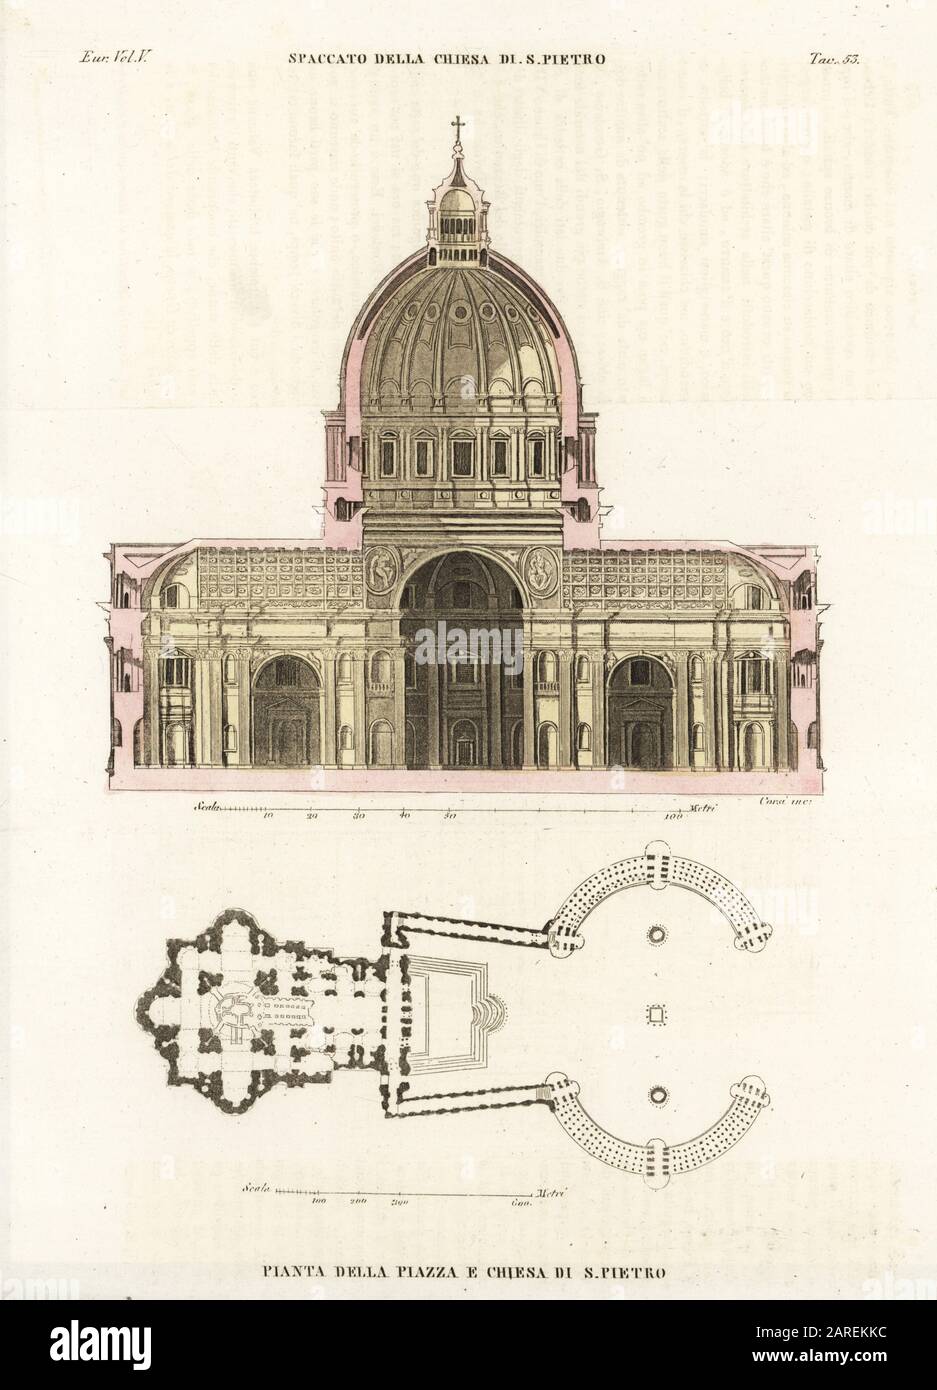 Cross-section and plan of St. Peter’s Basilica, Rome. Spaccato della Chiesa di S. Pietro. Pianta della Piazza e Chiesa di S. Pietro. Handcoloured copperplate engraving by Corsi from Giulio Ferrario’s Costumes Ancient and Modern of the Peoples of the World, Il Costume Antico e Moderno, Florence, 1843. Stock Photo